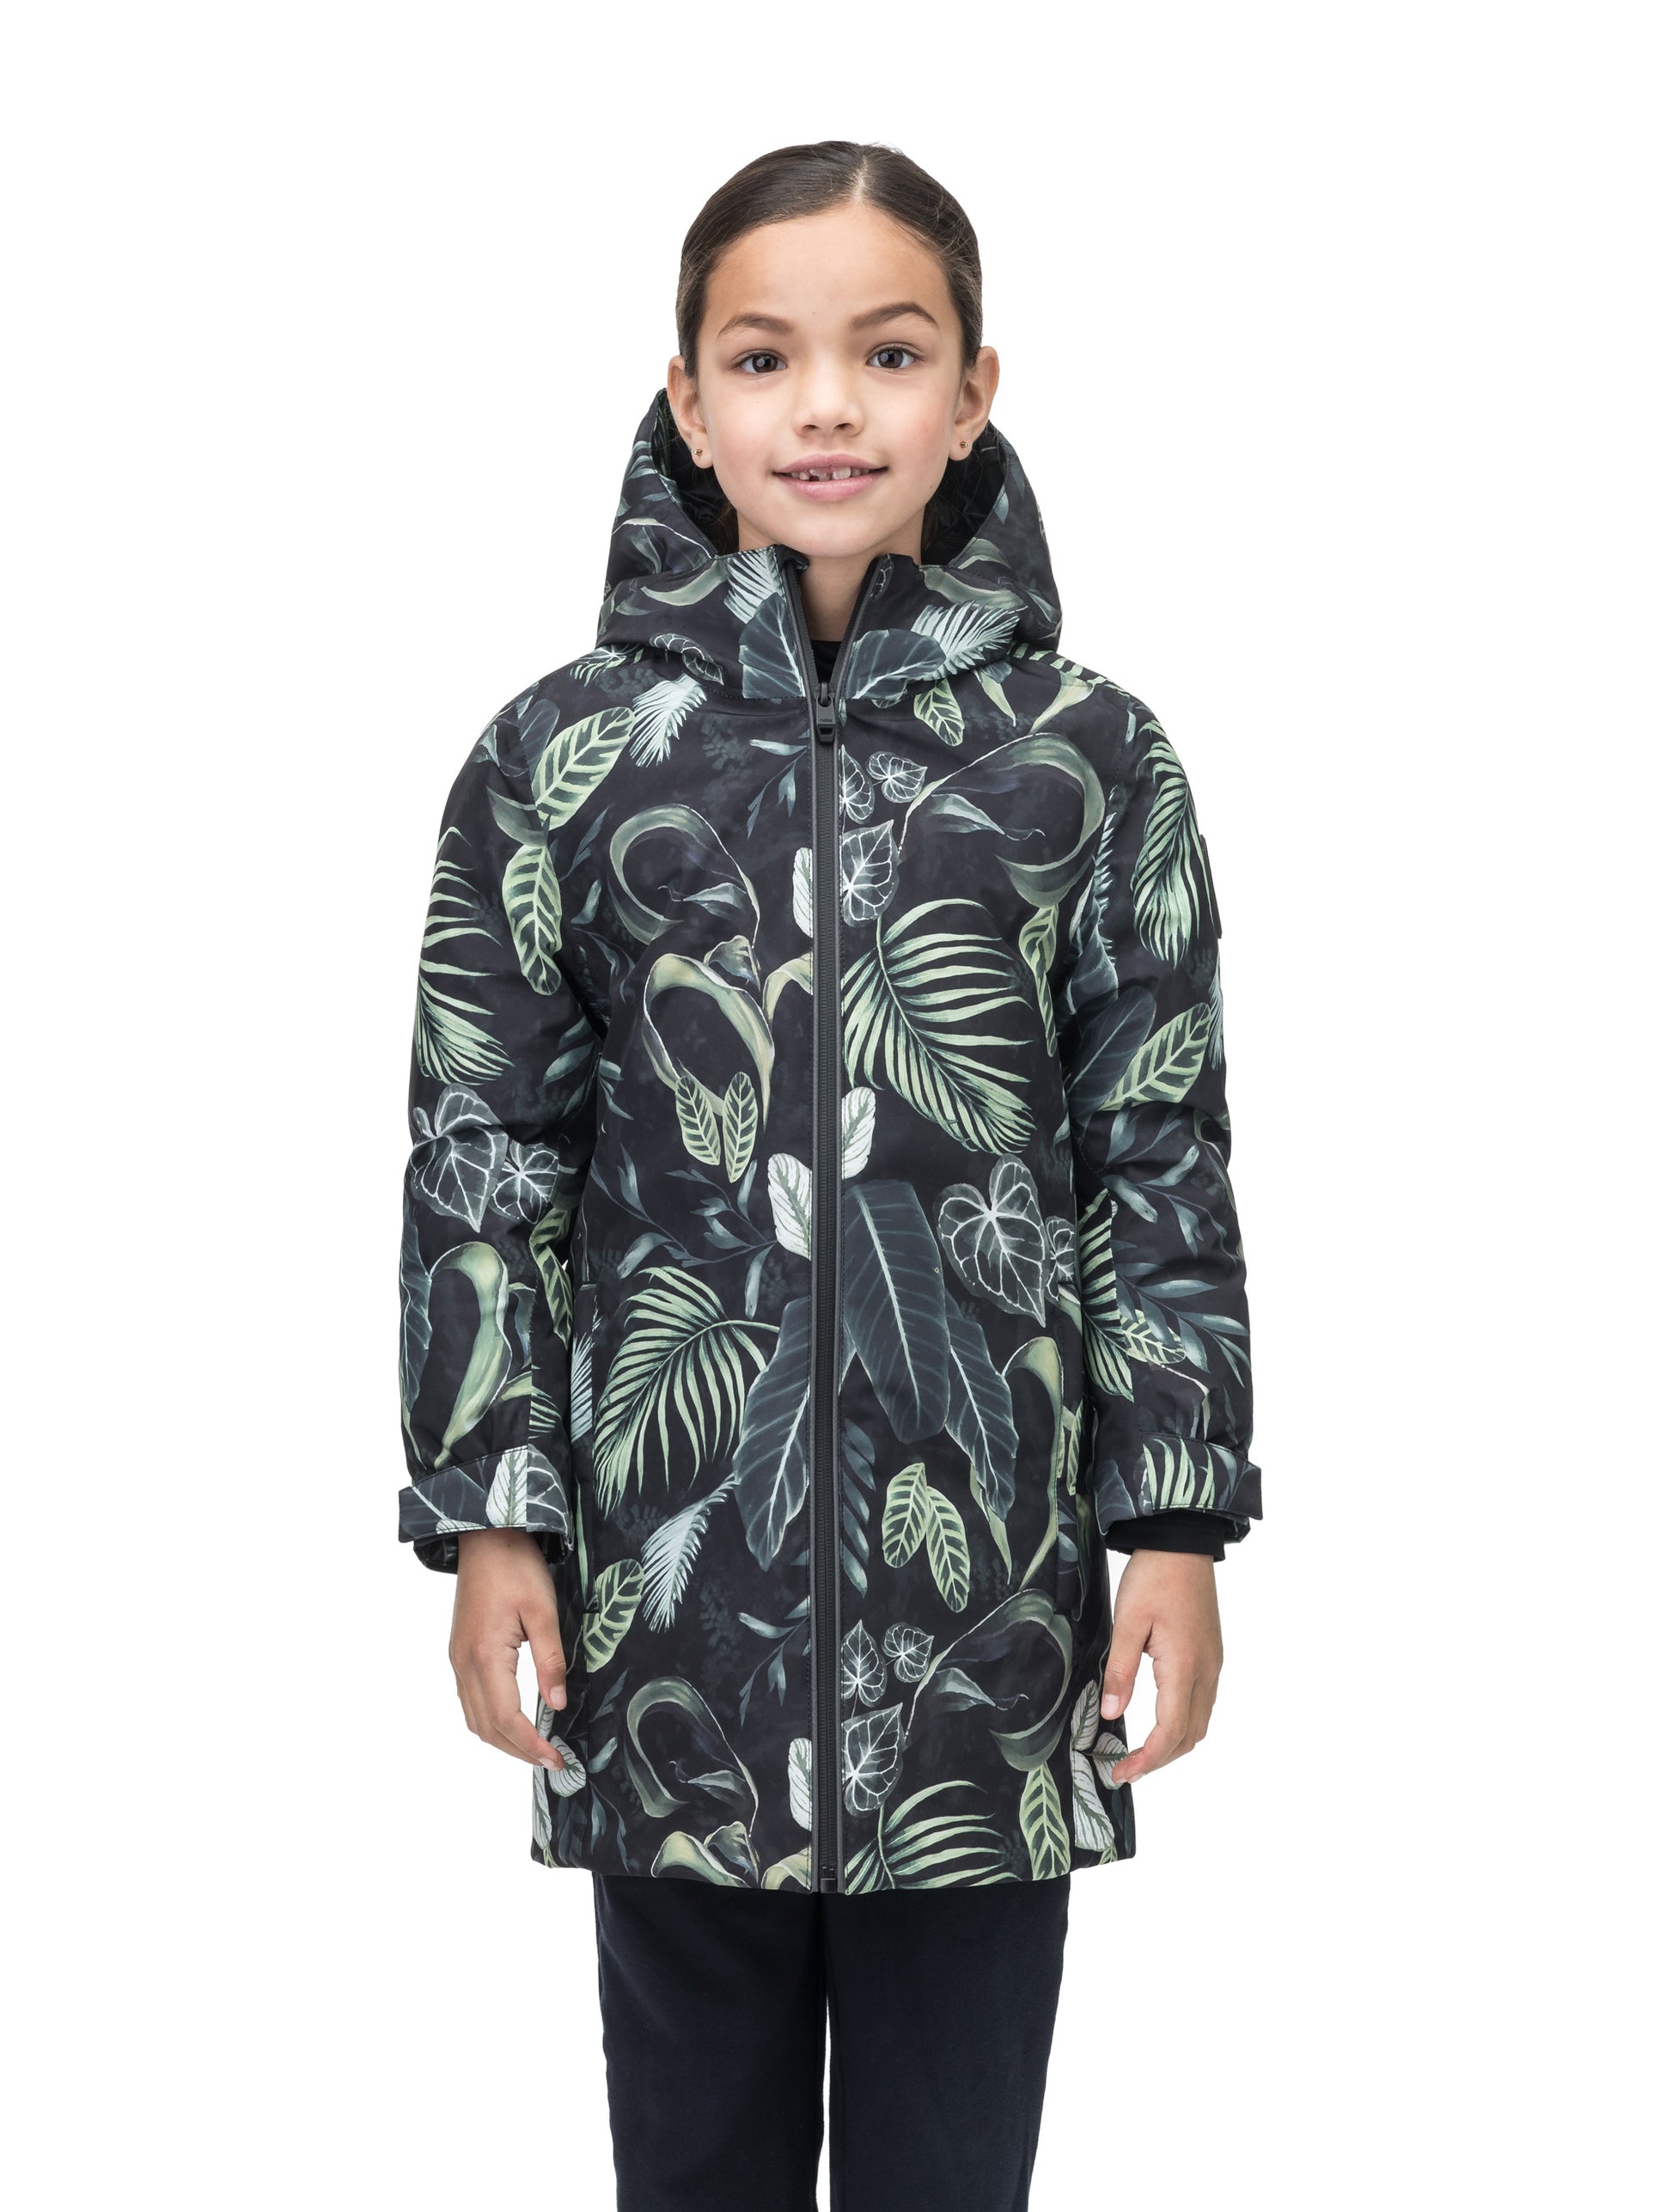 Little Comet Kids Parka in thigh length, Canadian duck down insulation, non-removable hood, two-way front zipper, packable body, in Foliage